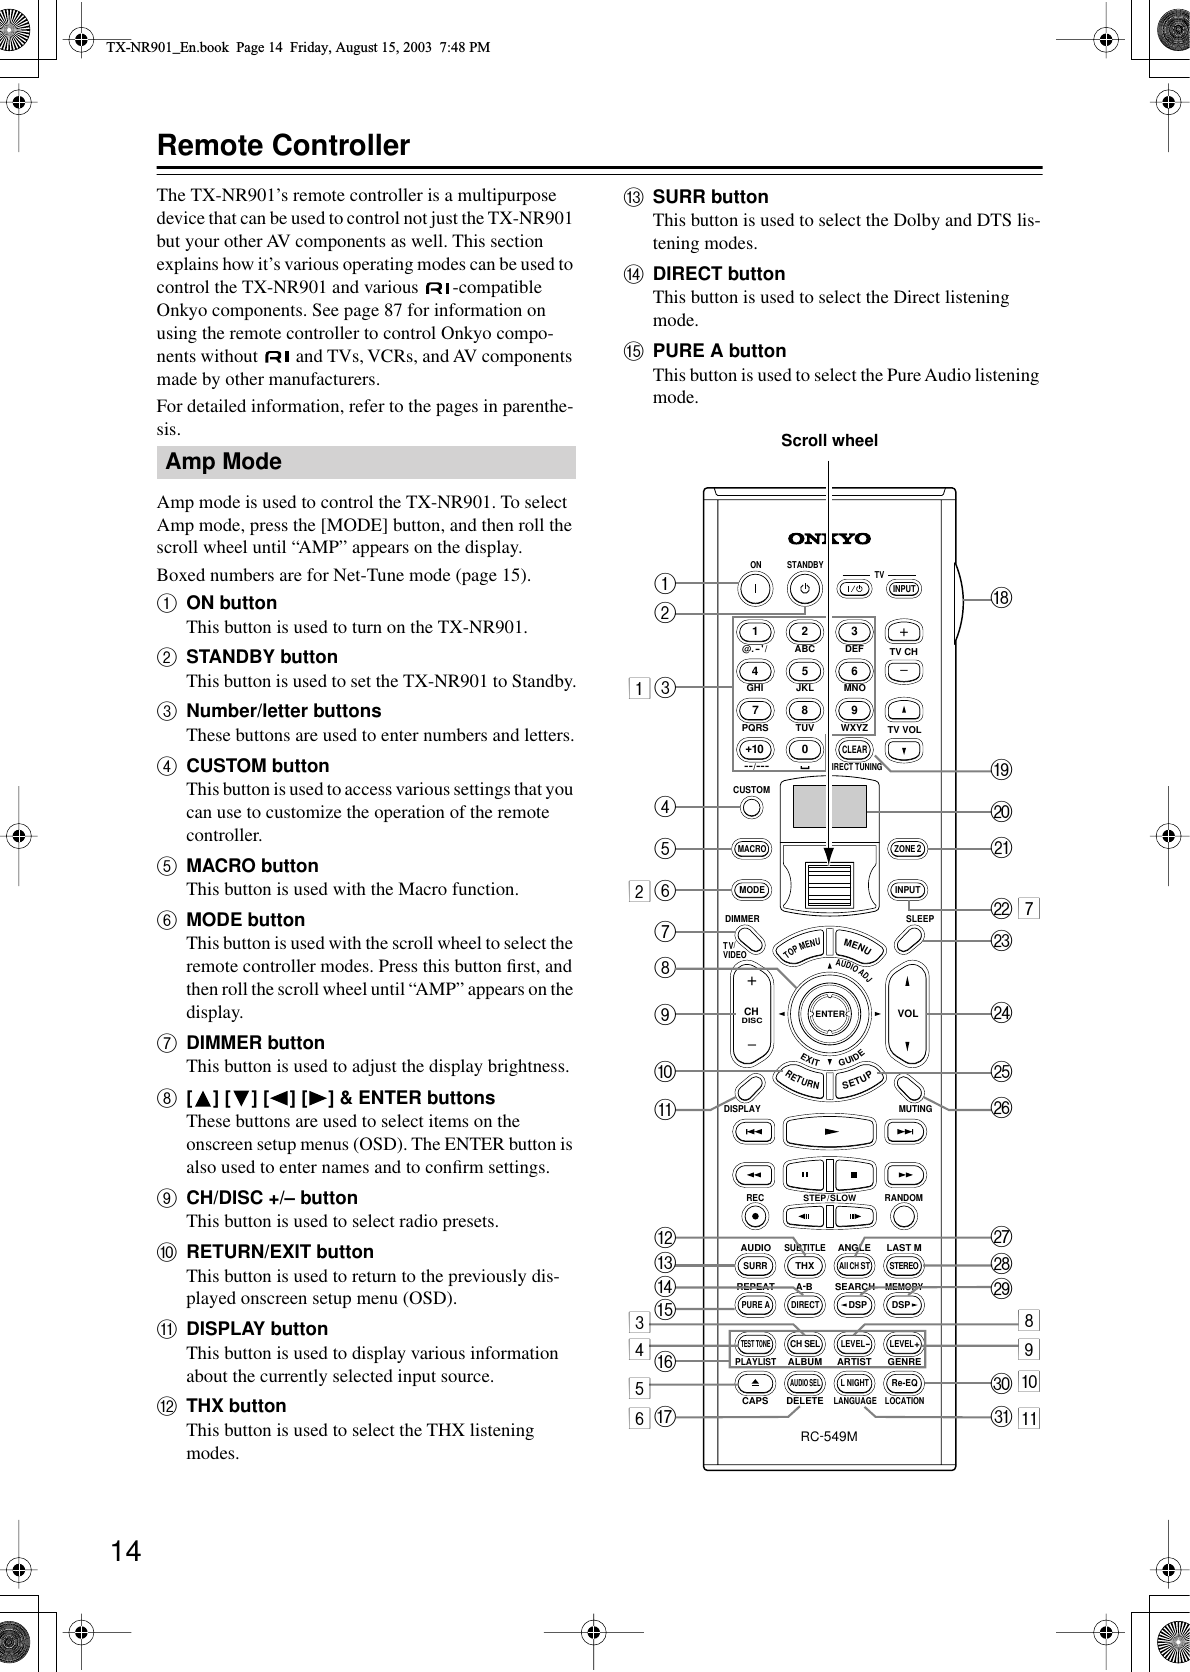 14Remote ControllerThe TX-NR901’s remote controller is a multipurpose device that can be used to control not just the TX-NR901 but your other AV components as well. This section explains how it’s various operating modes can be used to control the TX-NR901 and various  -compatible Onkyo components. See page 87 for information on using the remote controller to control Onkyo compo-nents without   and TVs, VCRs, and AV components made by other manufacturers.For detailed information, refer to the pages in parenthe-sis.Amp mode is used to control the TX-NR901. To select Amp mode, press the [MODE] button, and then roll the scroll wheel until “AMP” appears on the display.Boxed numbers are for Net-Tune mode (page 15).AON buttonThis button is used to turn on the TX-NR901.BSTANDBY buttonThis button is used to set the TX-NR901 to Standby.CNumber/letter buttonsThese buttons are used to enter numbers and letters.DCUSTOM buttonThis button is used to access various settings that you can use to customize the operation of the remote controller.EMACRO buttonThis button is used with the Macro function.FMODE buttonThis button is used with the scroll wheel to select the remote controller modes. Press this button ﬁrst, and then roll the scroll wheel until “AMP” appears on the display.GDIMMER buttonThis button is used to adjust the display brightness.H[] [ ] [ ] [ ] &amp; ENTER buttonsThese buttons are used to select items on the onscreen setup menus (OSD). The ENTER button is also used to enter names and to conﬁrm settings.ICH/DISC +/– buttonThis button is used to select radio presets.JRETURN/EXIT buttonThis button is used to return to the previously dis-played onscreen setup menu (OSD).KDISPLAY buttonThis button is used to display various information about the currently selected input source.LTHX buttonThis button is used to select the THX listening modes.MSURR buttonThis button is used to select the Dolby and DTS lis-tening modes.NDIRECT buttonThis button is used to select the Direct listening mode.OPURE A buttonThis button is used to select the Pure Audio listening mode.Amp Mode--/---@. - &apos; /ABC DEFPQRS TUV WXYZDIRECT TUNINGGHI JKL MNOCAPS DELETELANGUAGE LOCATIONALBUM AR TIST GENREPLAYLISTCUSTOMDISPLAYDIMMERT V/ VIDEOSLEEPRANDOMRECSTEP / SLOWMUTINGENTERLAST MANGLESUBTITLEAUDIOMEMORYSEARCHA-BREPEATON STANDBY TVTV CHTV VOLRC-549MAUDIOADJEXITGUIDE+10 0CLEAR123456789INPUTTOPMENUMENUSETUPRETURNZONE 2INPUTMODEMACROVOLCHDISCTEST TONECH SELPURE ASURRDIRECTSTEREORe-EQTHXAll CH STLEVEL+LEVEL-L NIGHTAUDIO SELDSP DSP+-+-ACDEFGIHJMLONPQKBRTUSWYZacebdXV2134567890AScroll wheelTX-NR901_En.book  Page 14  Friday, August 15, 2003  7:48 PM